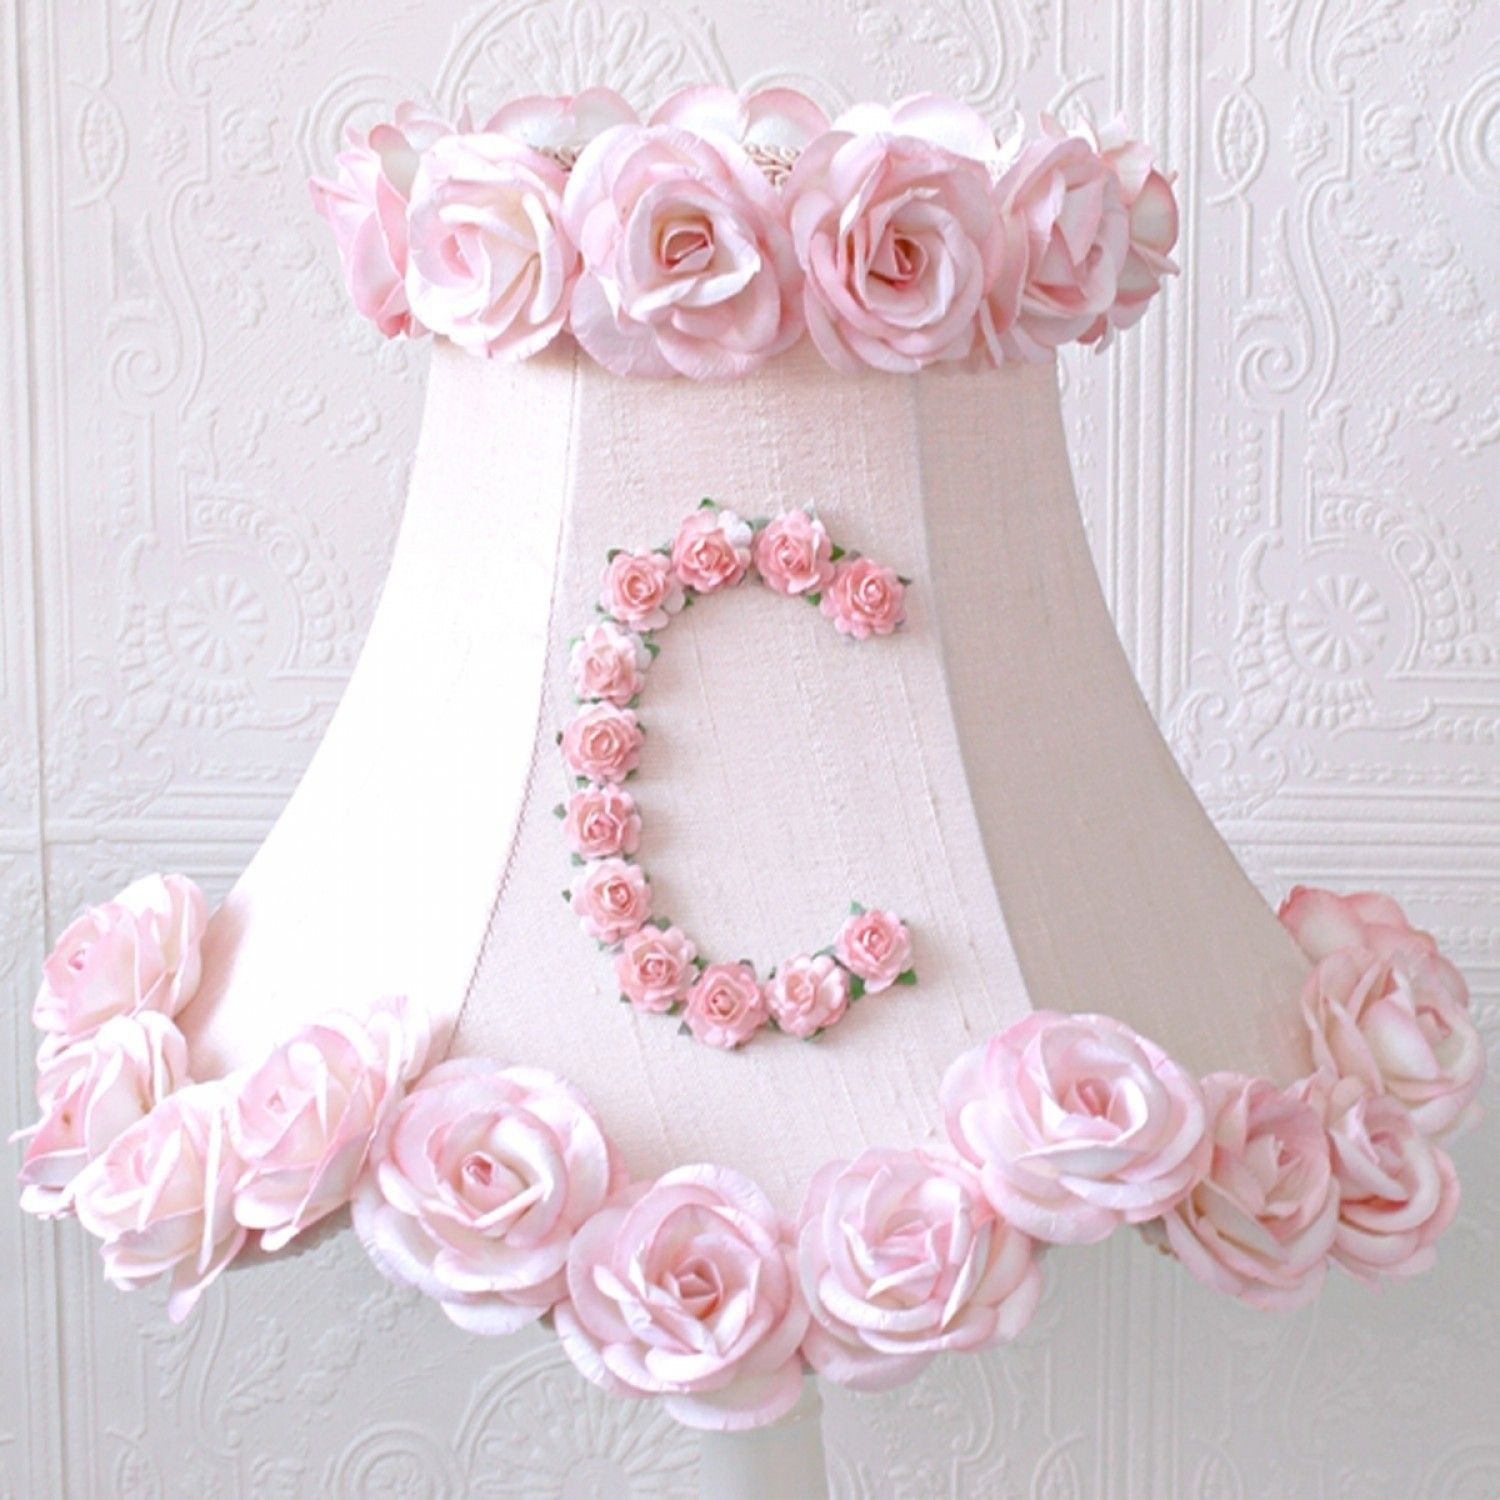 Personalized monogram pink lamp shade with roses 1